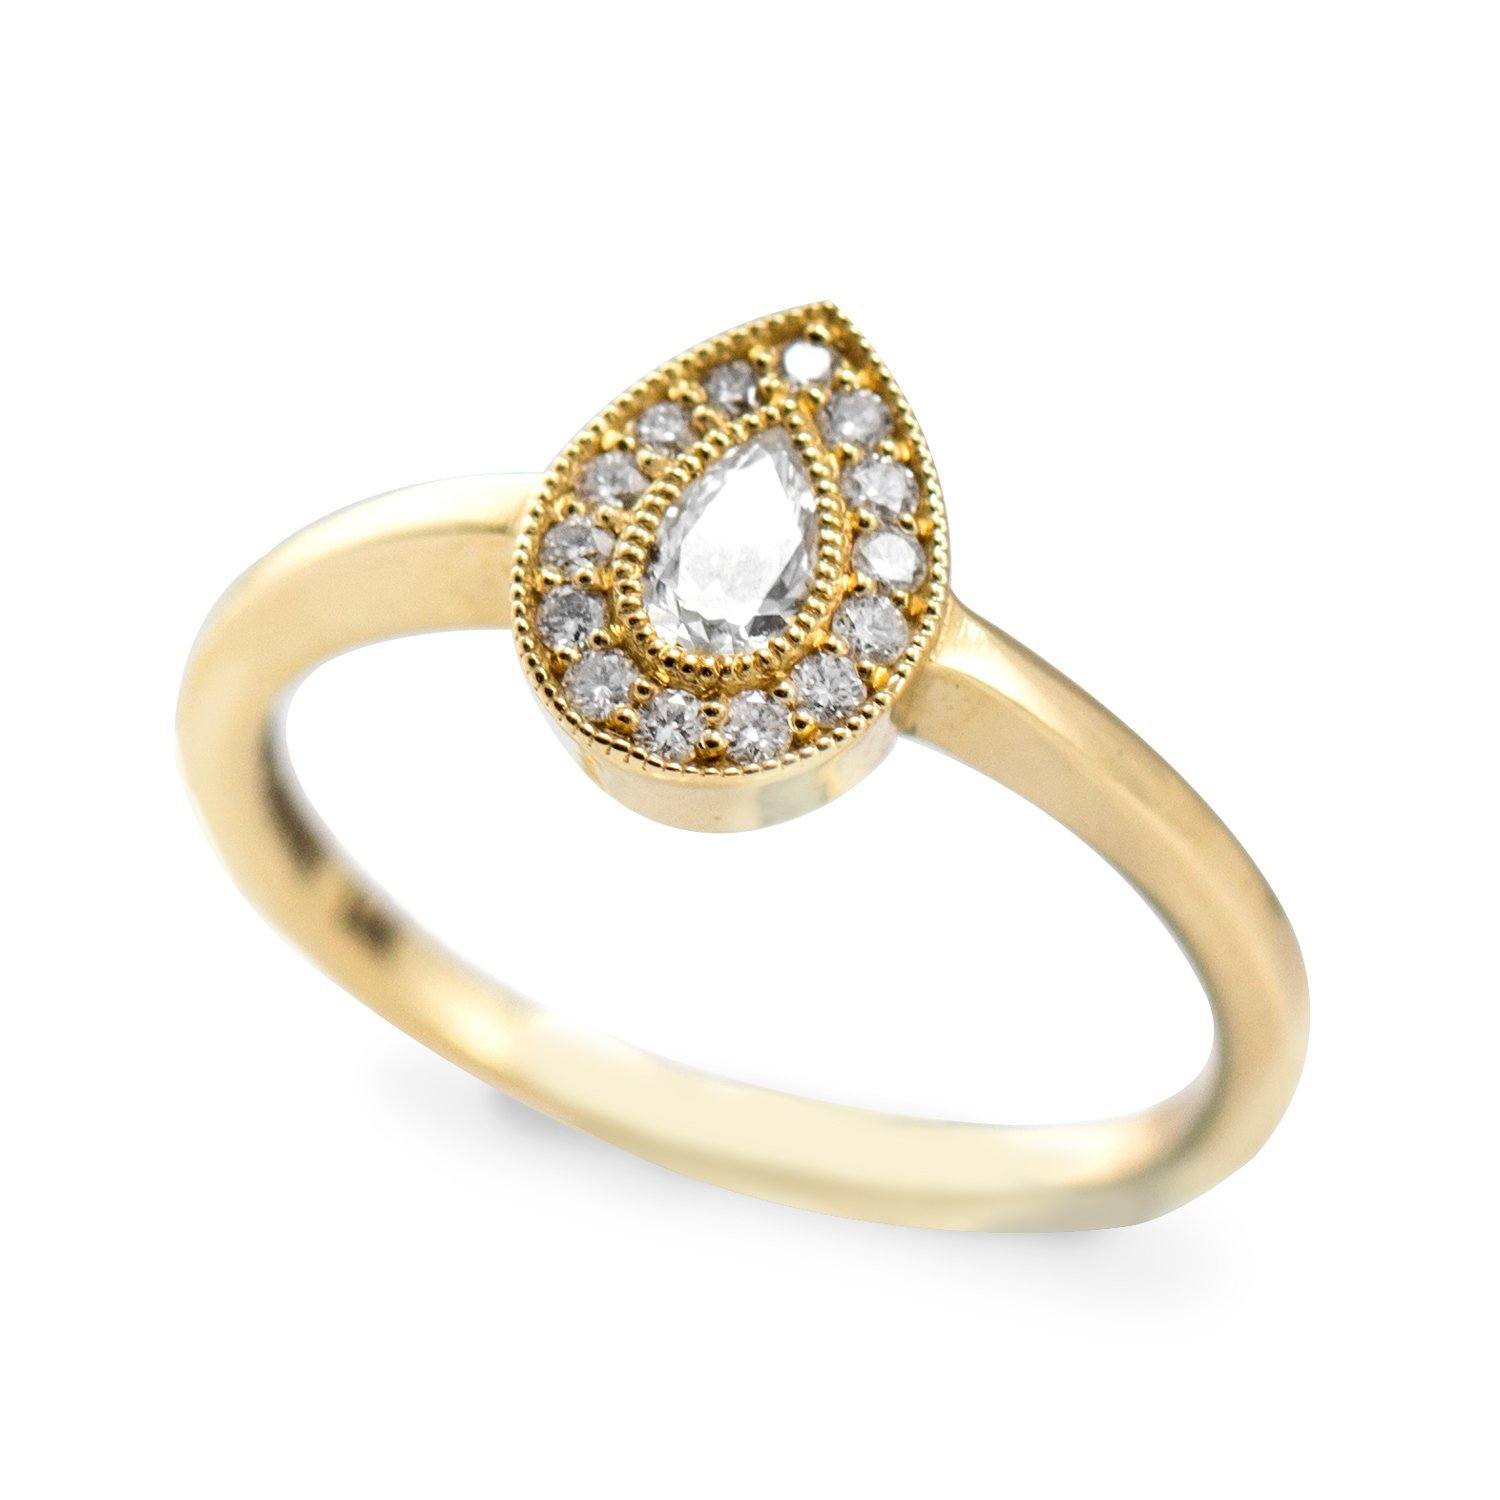 halo ring with pear shaped diamond